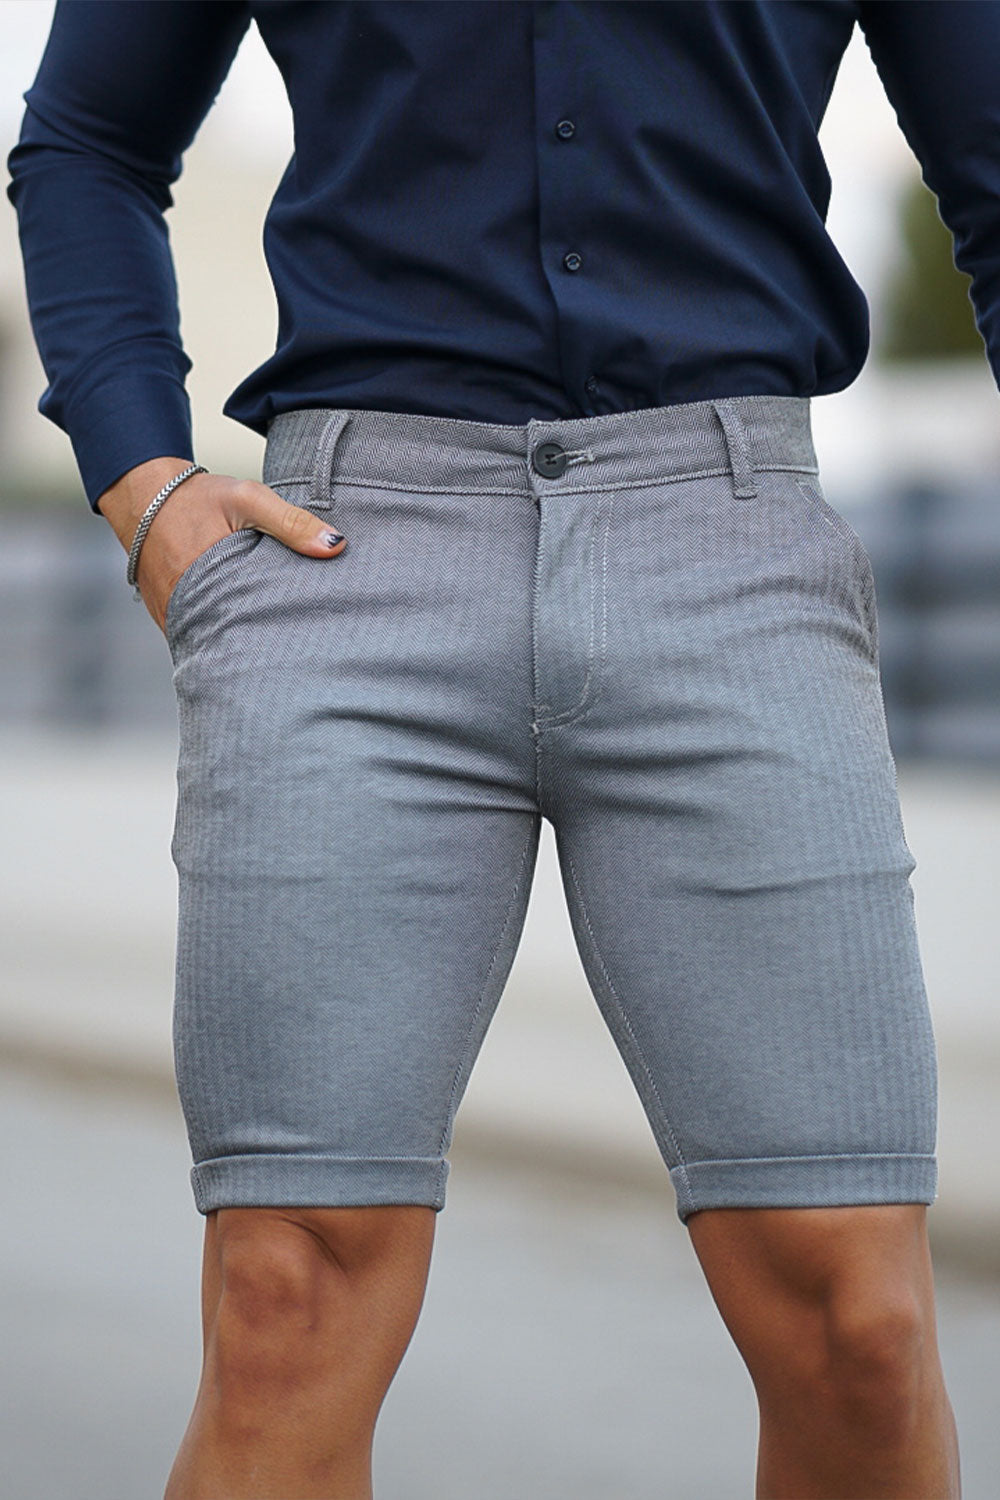 Gingtto Mens Cool Grey Chinos Shorts Versatility For Every Occasion